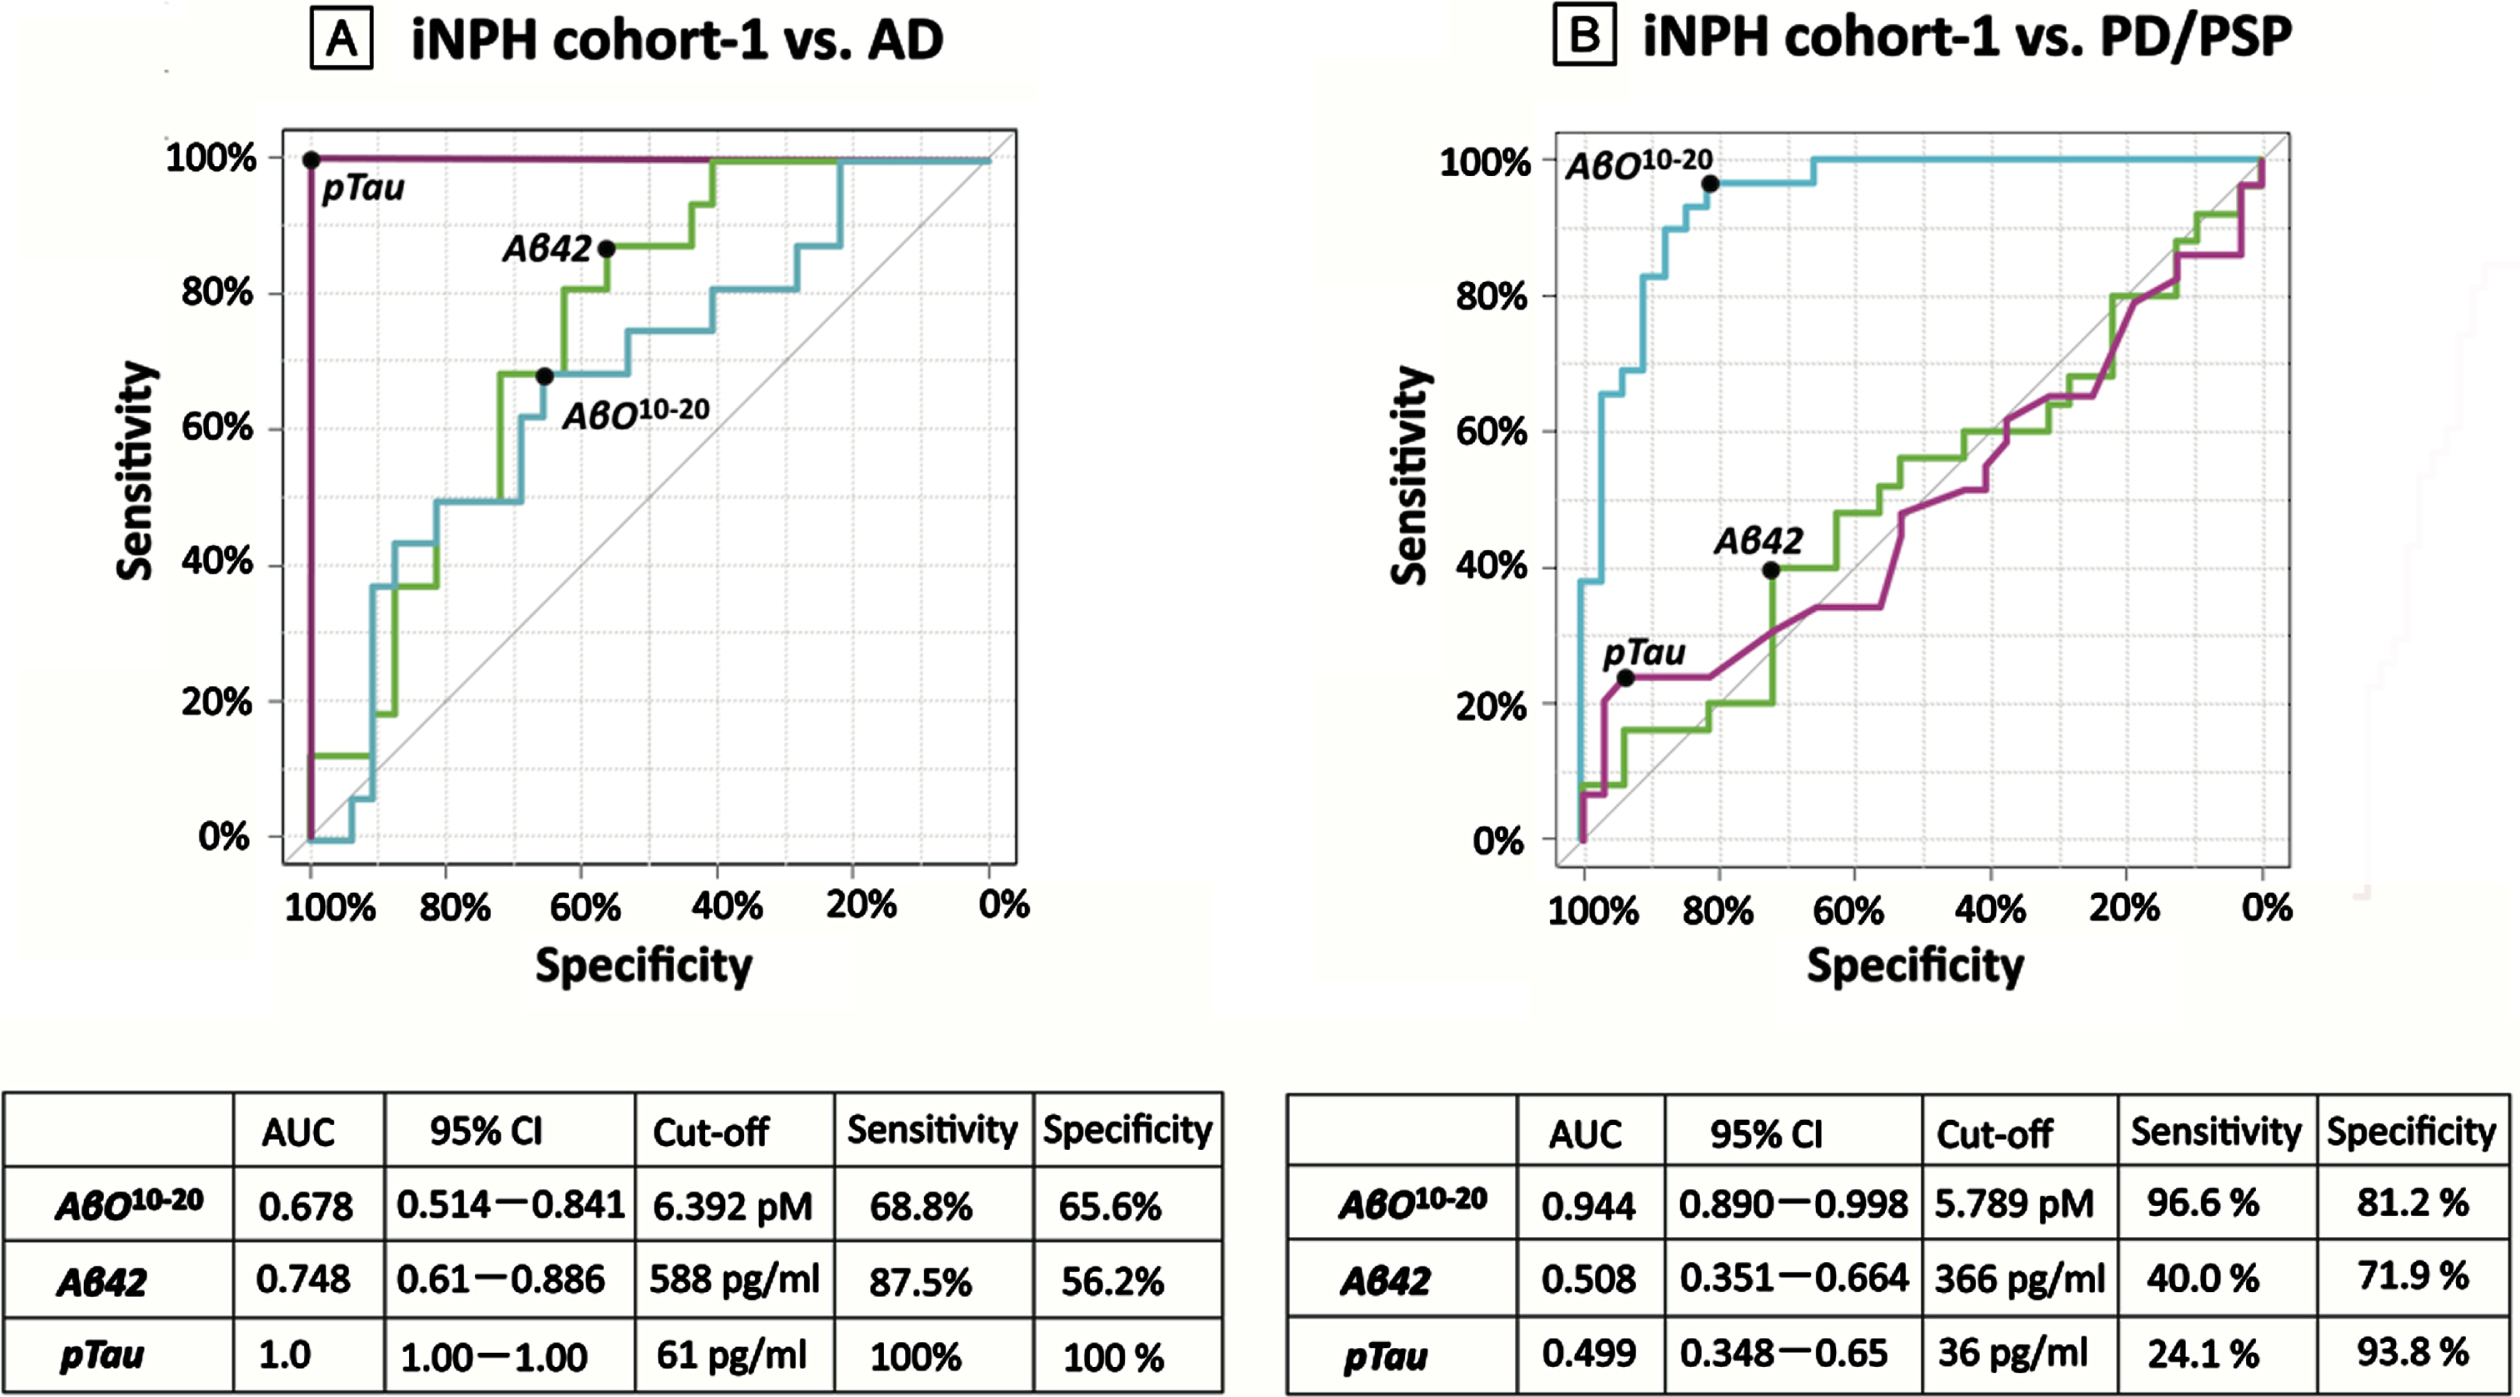 AUROC analysis in study 1. AUROC analysis of AβO10–20 levels (blue), Aβ42 levels (green), and pTau levels (purple) as tools for differentiating groups. A) AβO10–20 levels differentiated members of iNPH cohort-1 from members of the AD groups with an AUC value of 0.678. B) AβO10–20 levels differentiated members of the iNPH cohort-1 from members of the PD and PSP groups with an AUC value of 0.944. AD, Alzheimer’s disease; AUC, area under the curve; Aβ42, amyloid beta 42; AβO10–20, amyloid-β oligomer10–20; CI, confidence interval; iNPH, idiopathic normal pressure hydrocephalus; PD, Parkinson’s disease; PSP, progressive supranuclear palsy; pTau, phosphorylated tau.